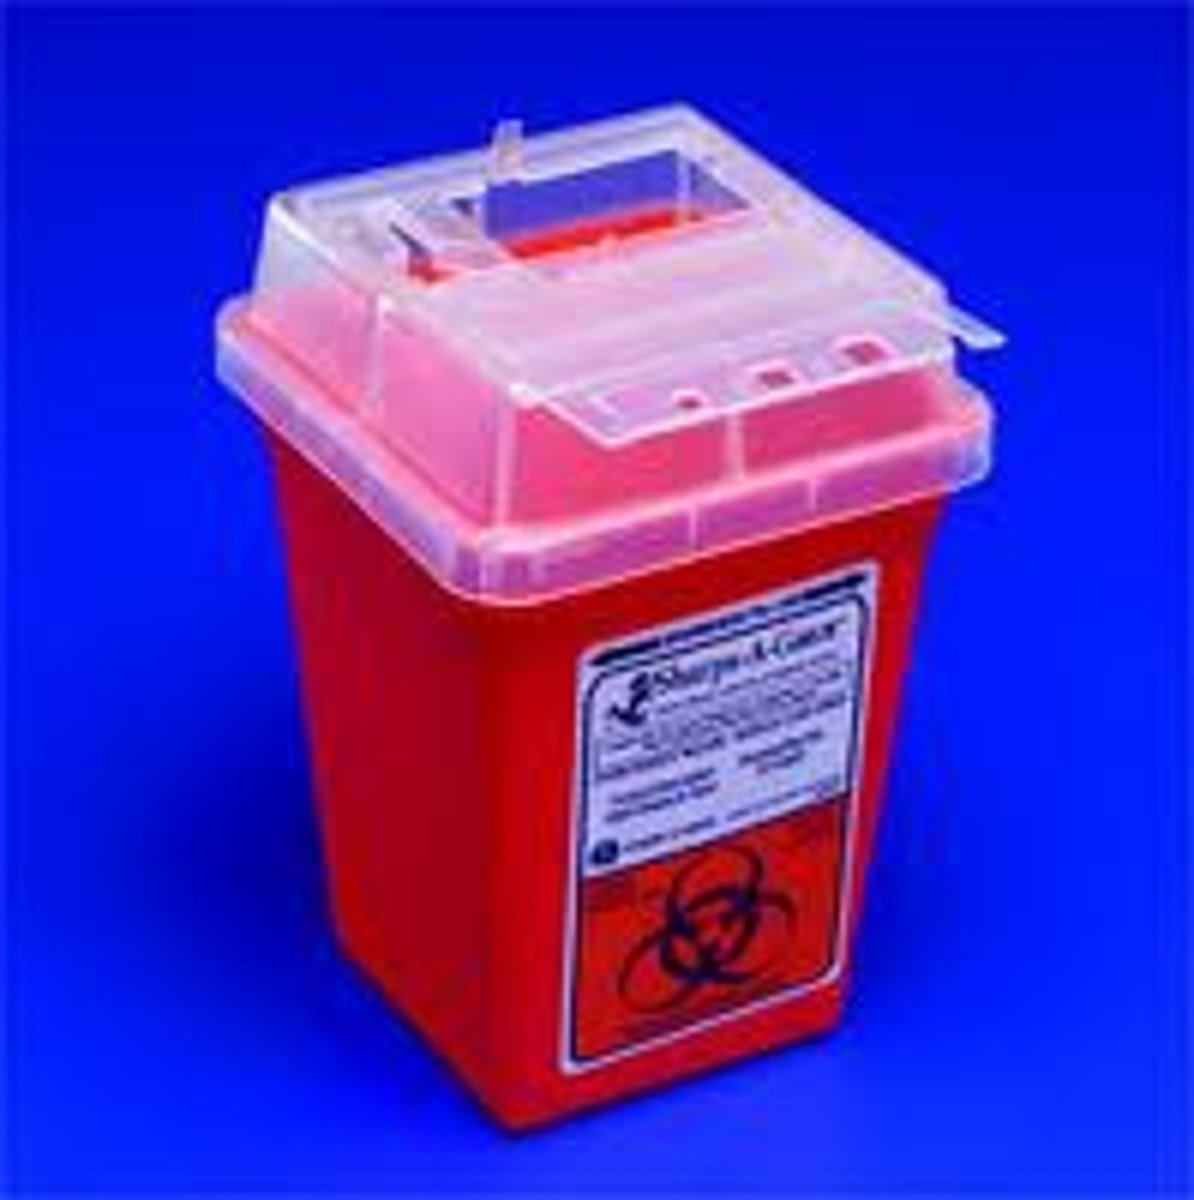 <p>a puncture resistant container used to dispose of contaminated needles and other sharp medical objects</p>